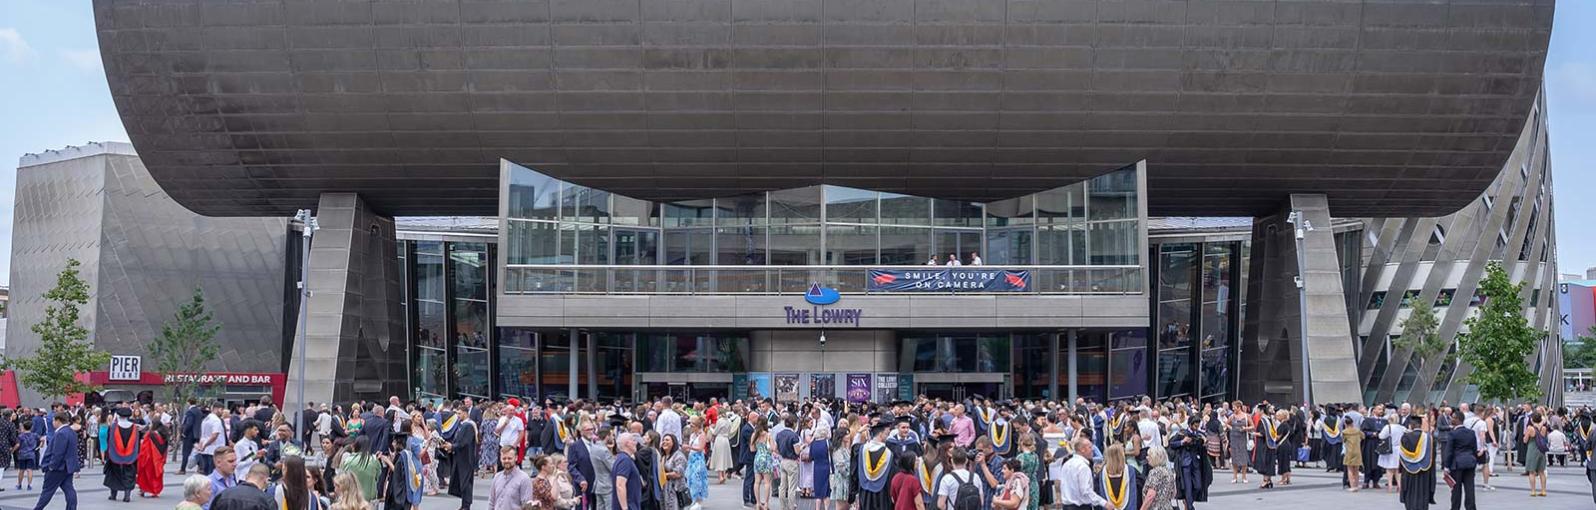 Graduation at the Lowry Theatre in Salford Quays